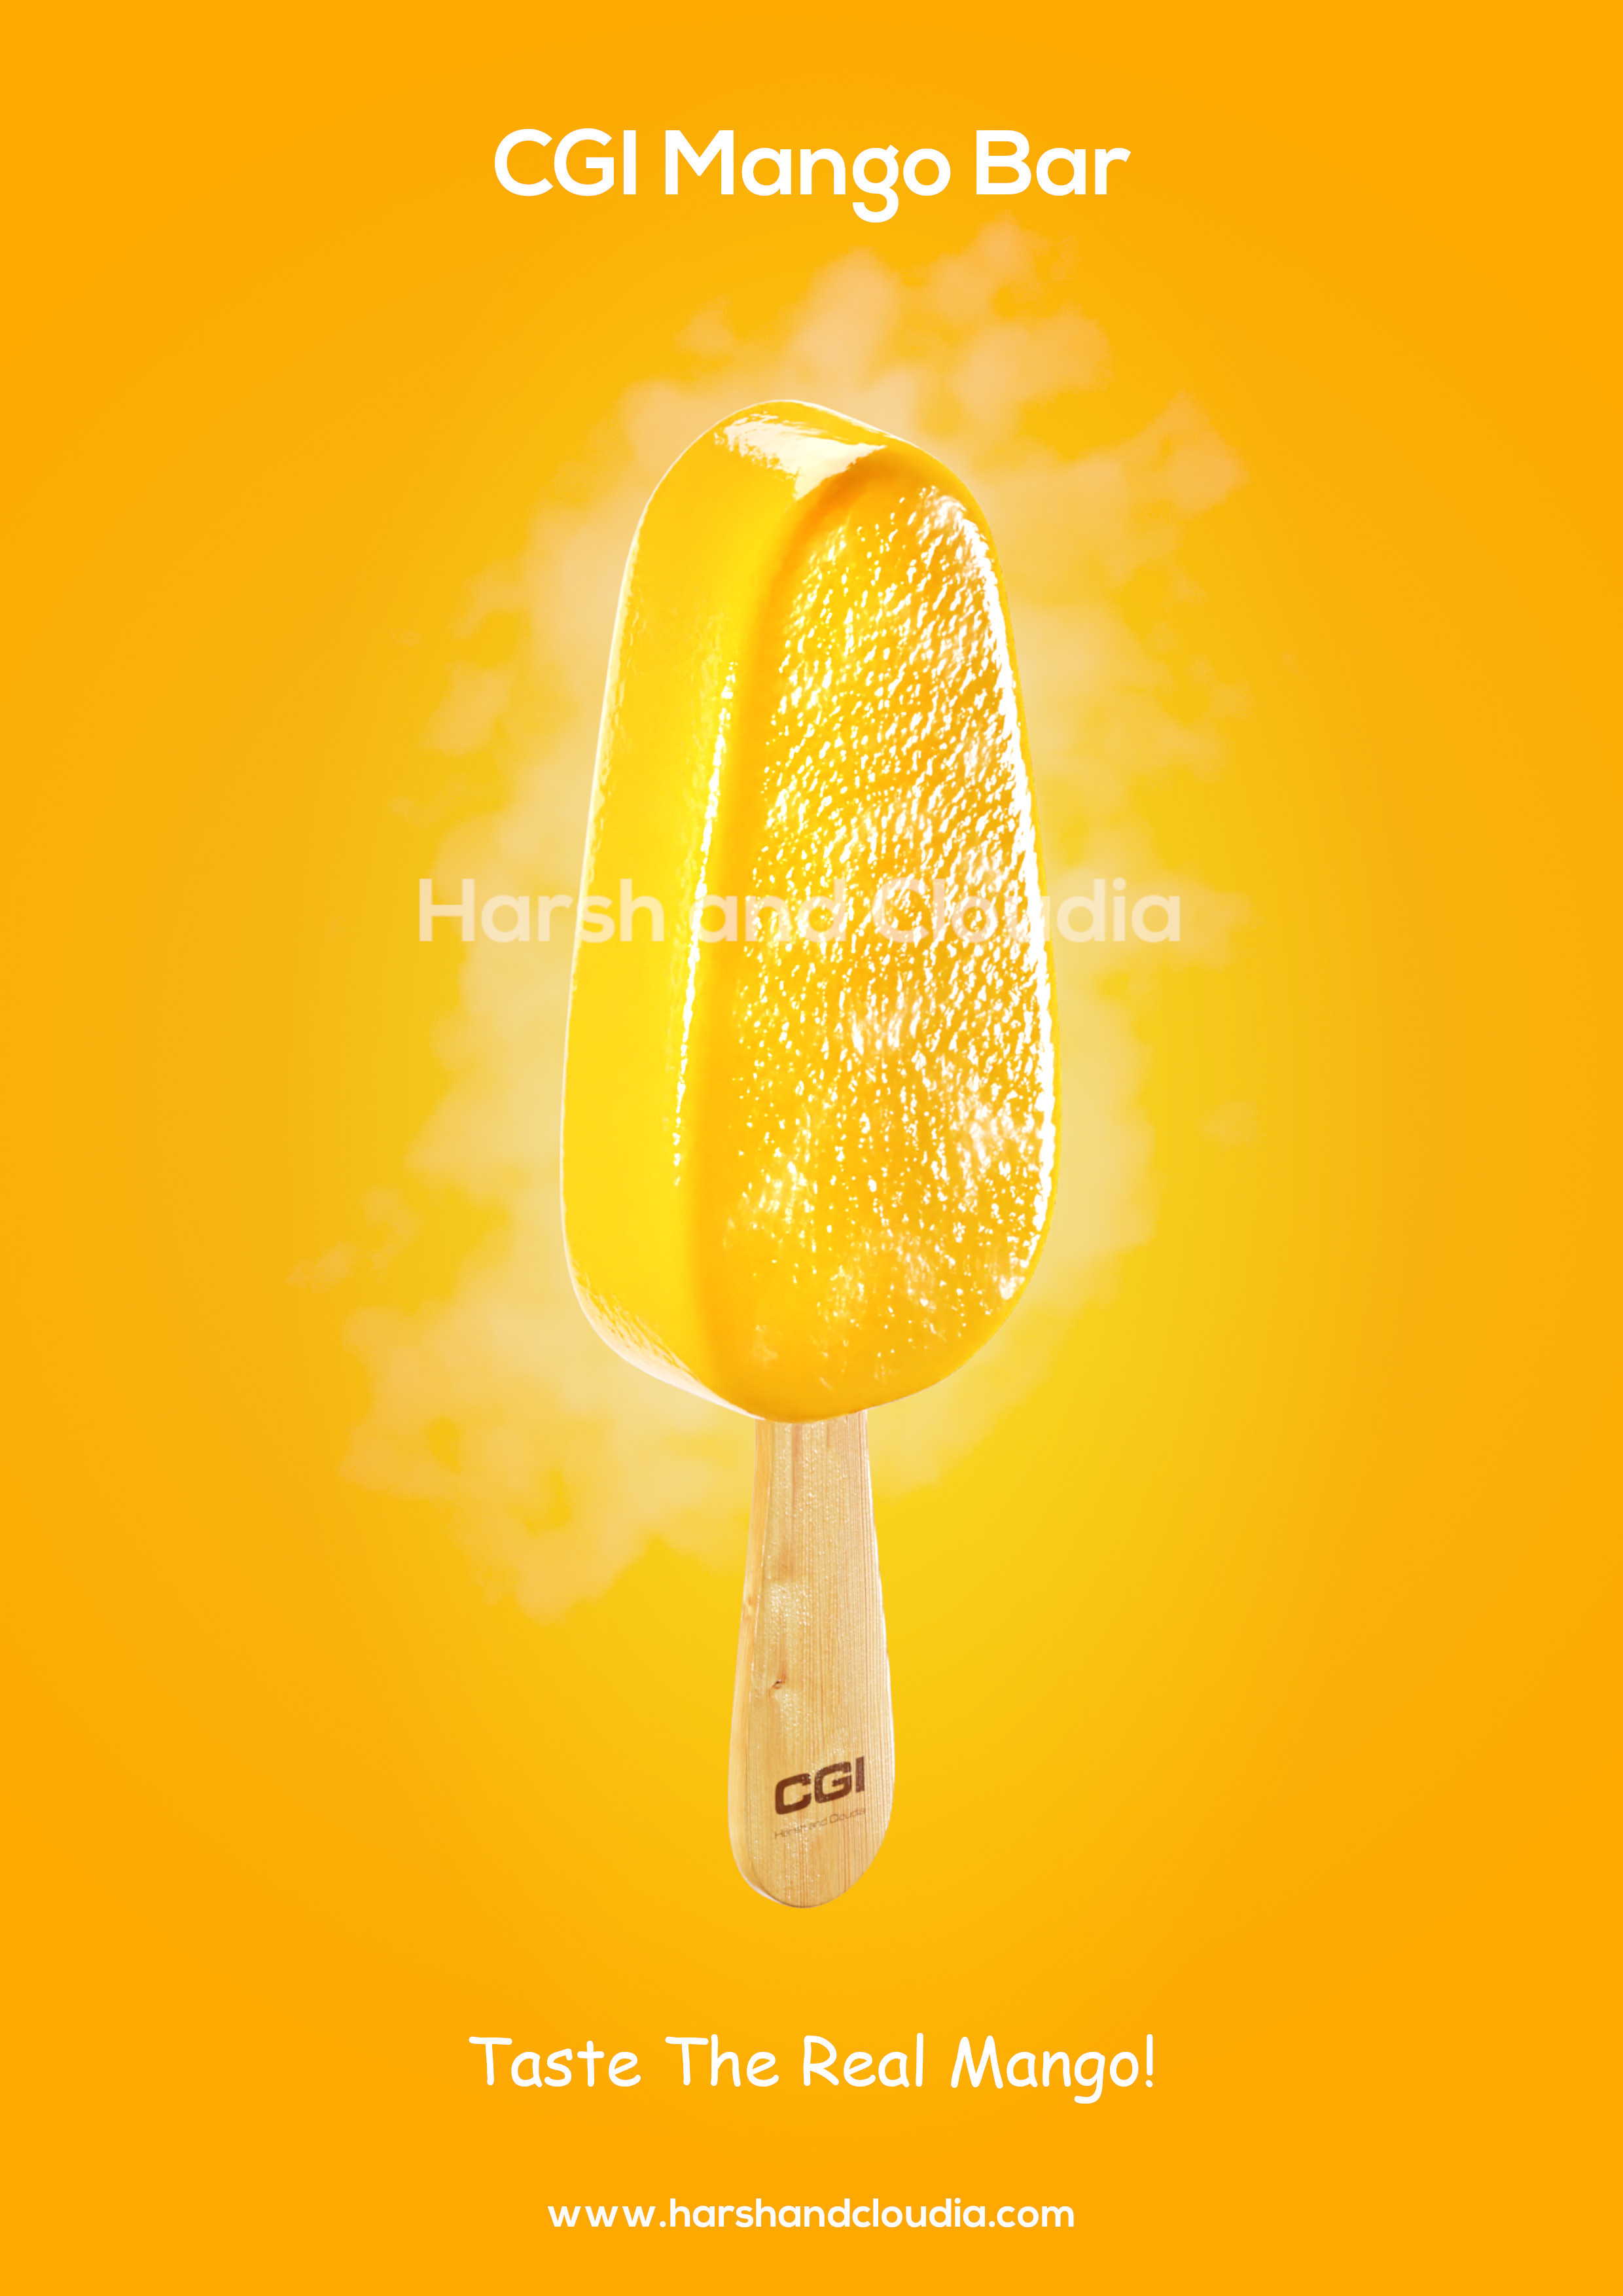 We focused to capture the wet and icy nature of the mango bar. The fog from the volumetric simulations adds a lot of story to the frosty feeling. The texturing reveals the juicy and mouth watering nature of the product.